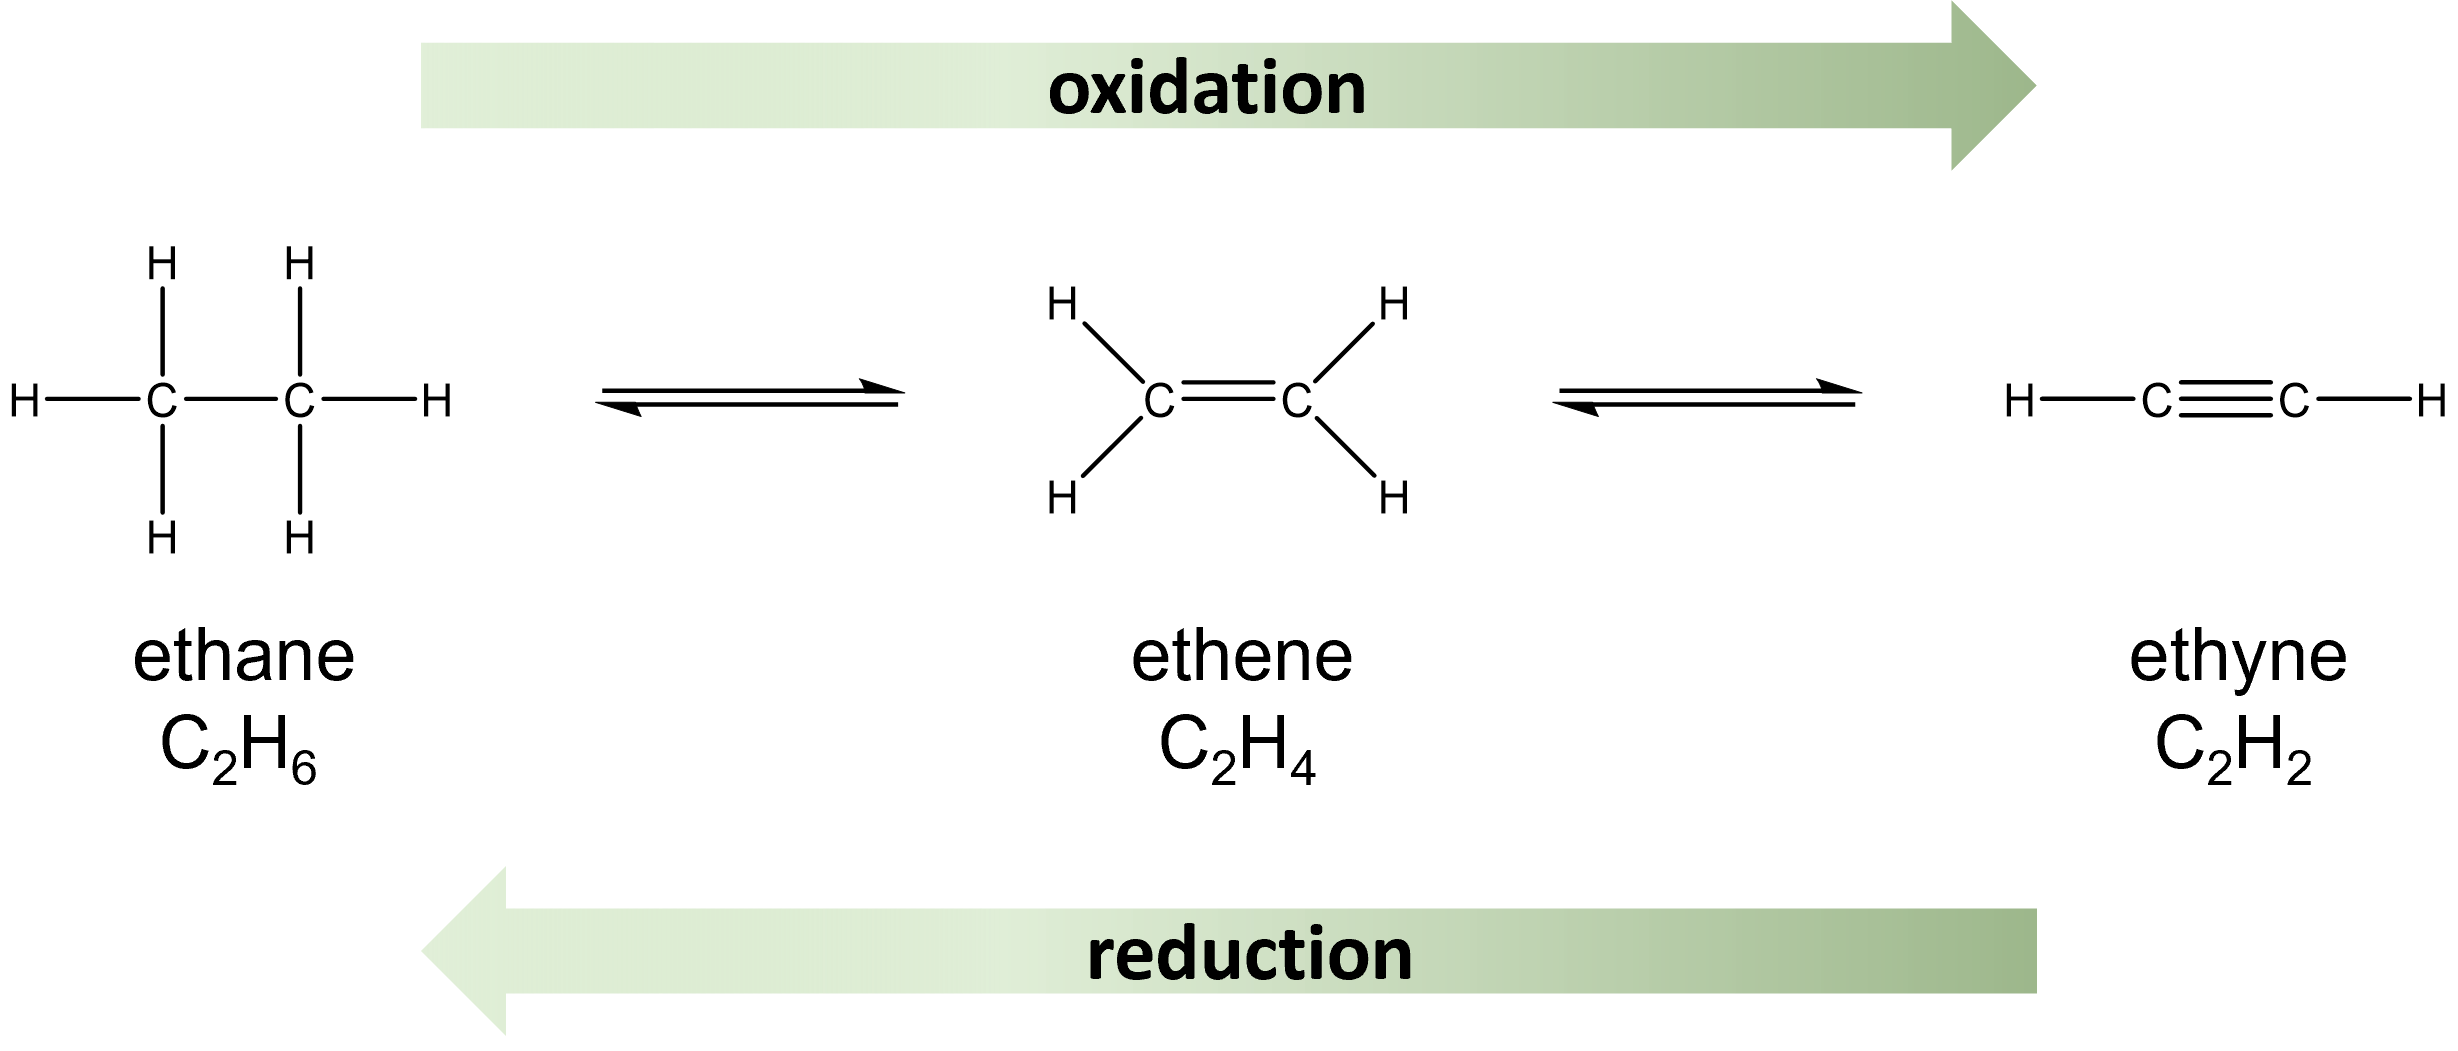 oxidation and reduction of hydrocarbons